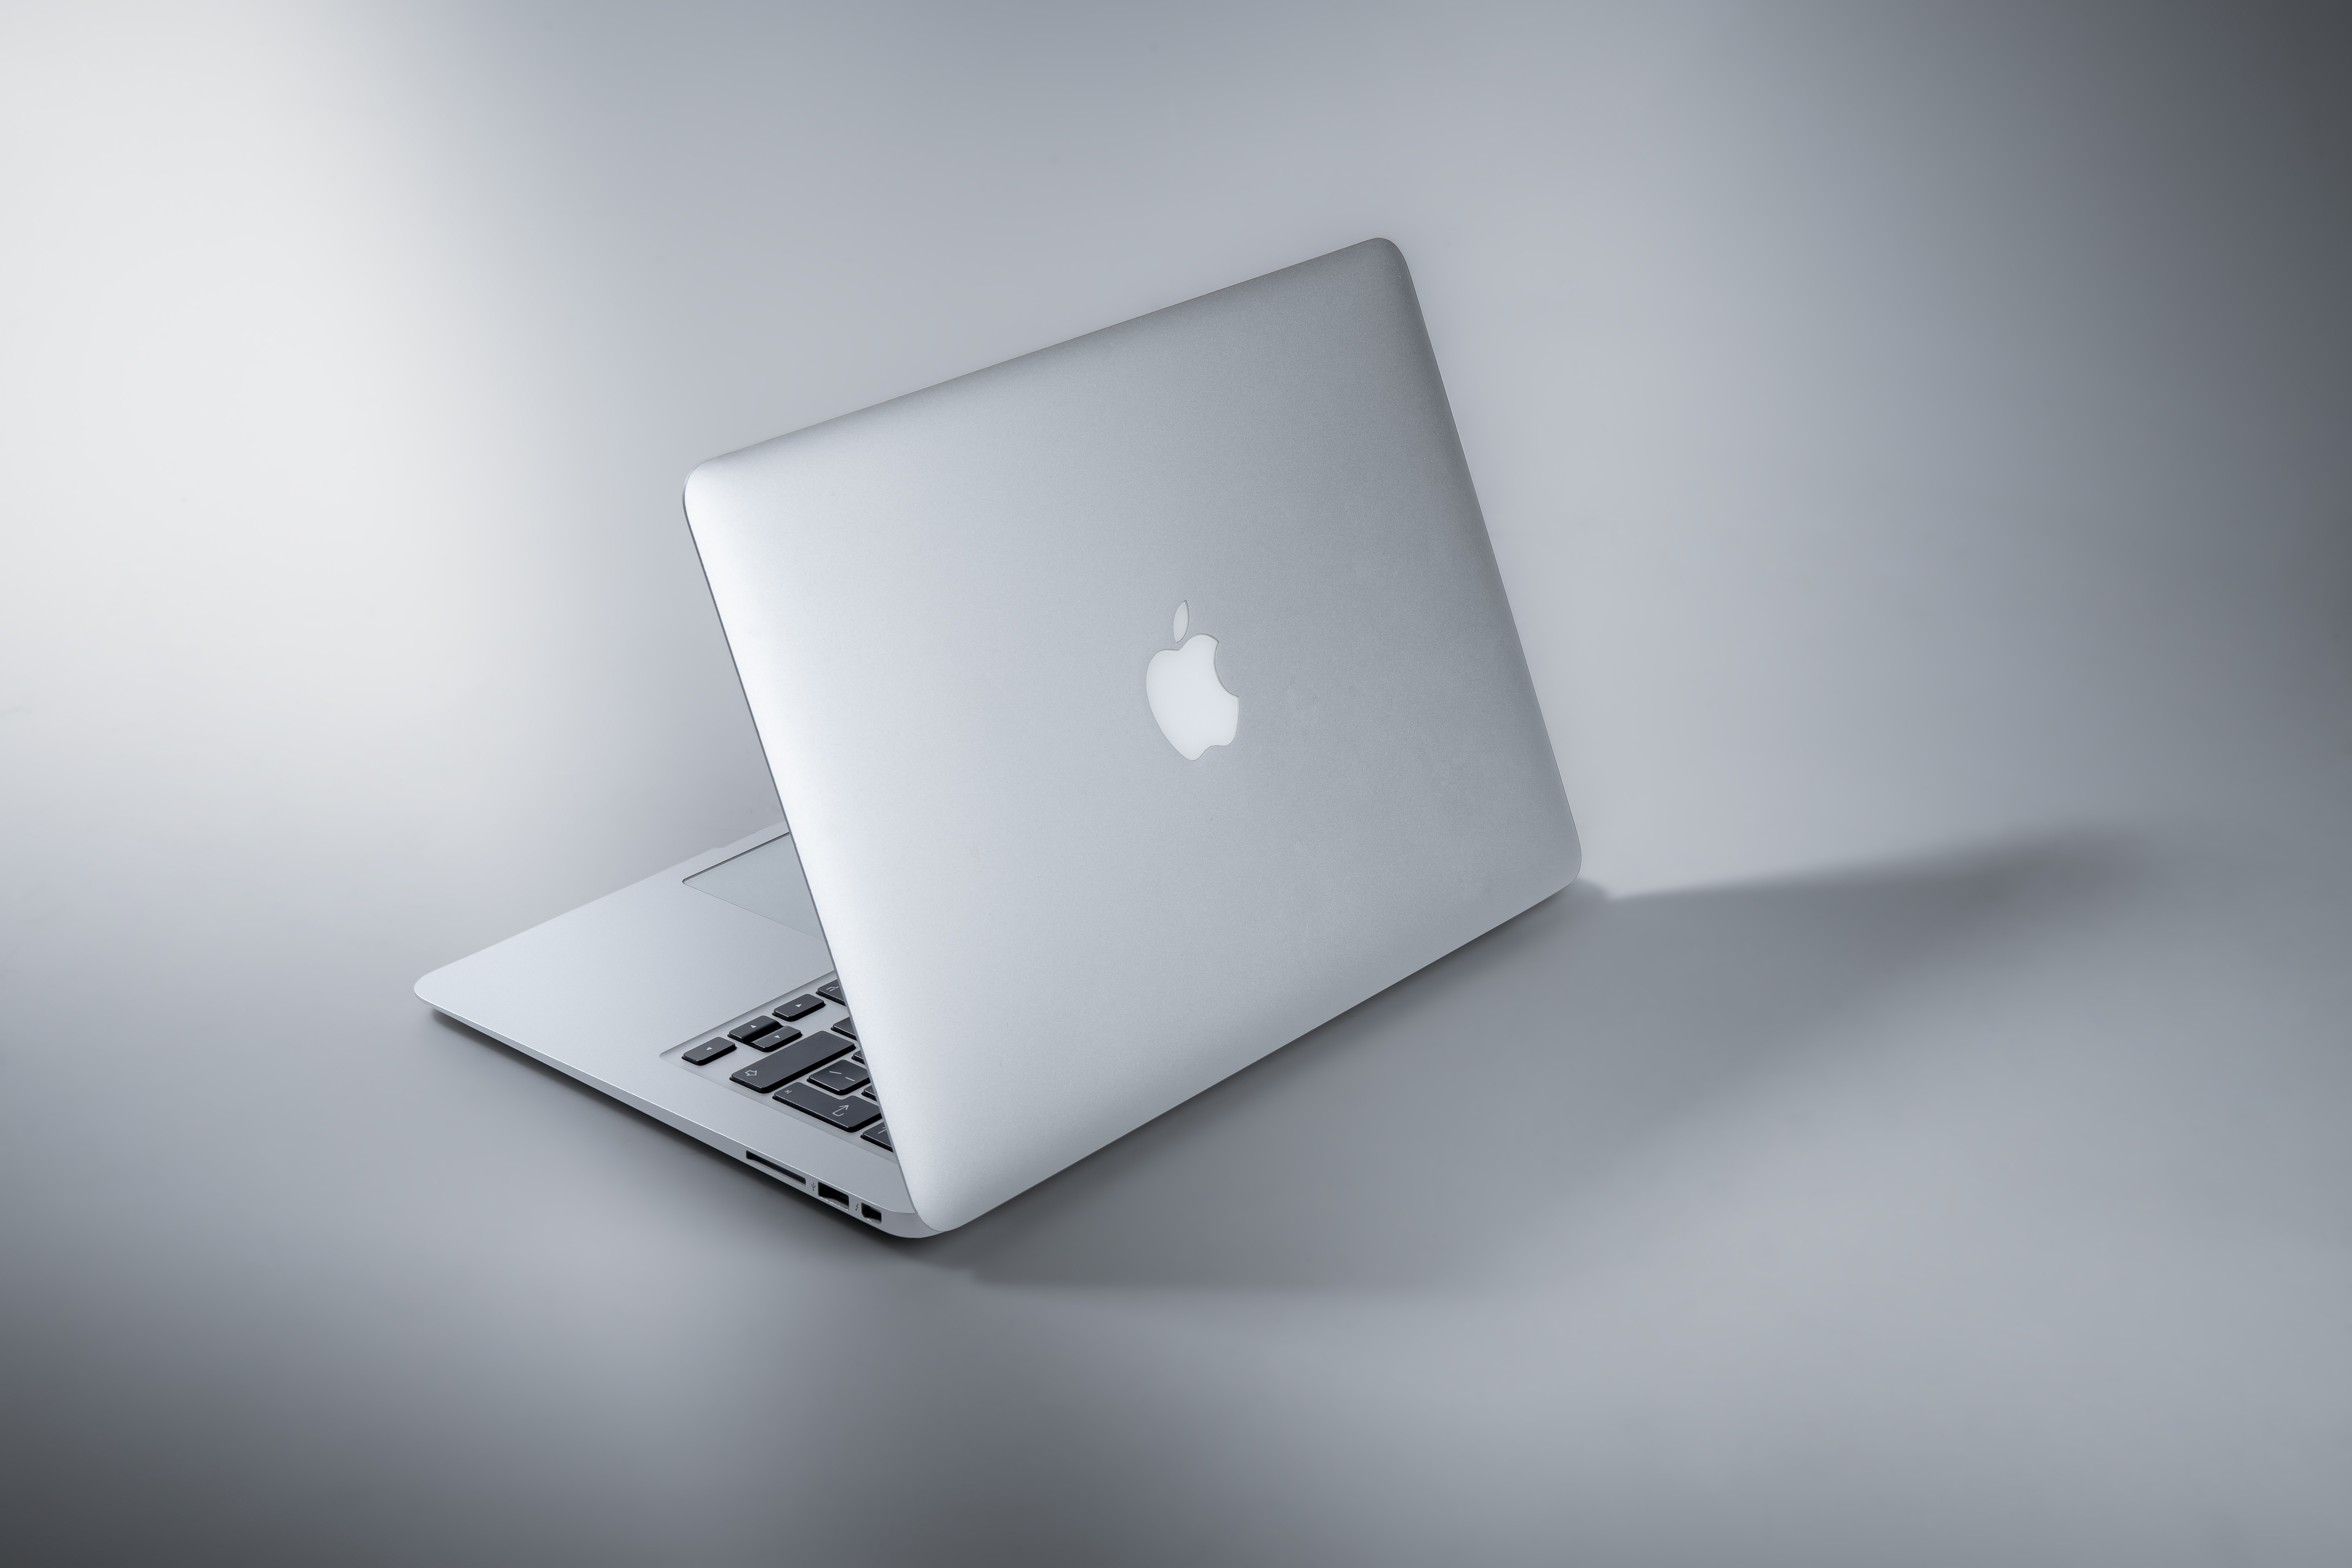 How to Track Your Macbook Air Location with “Find My Macbook Air” 7